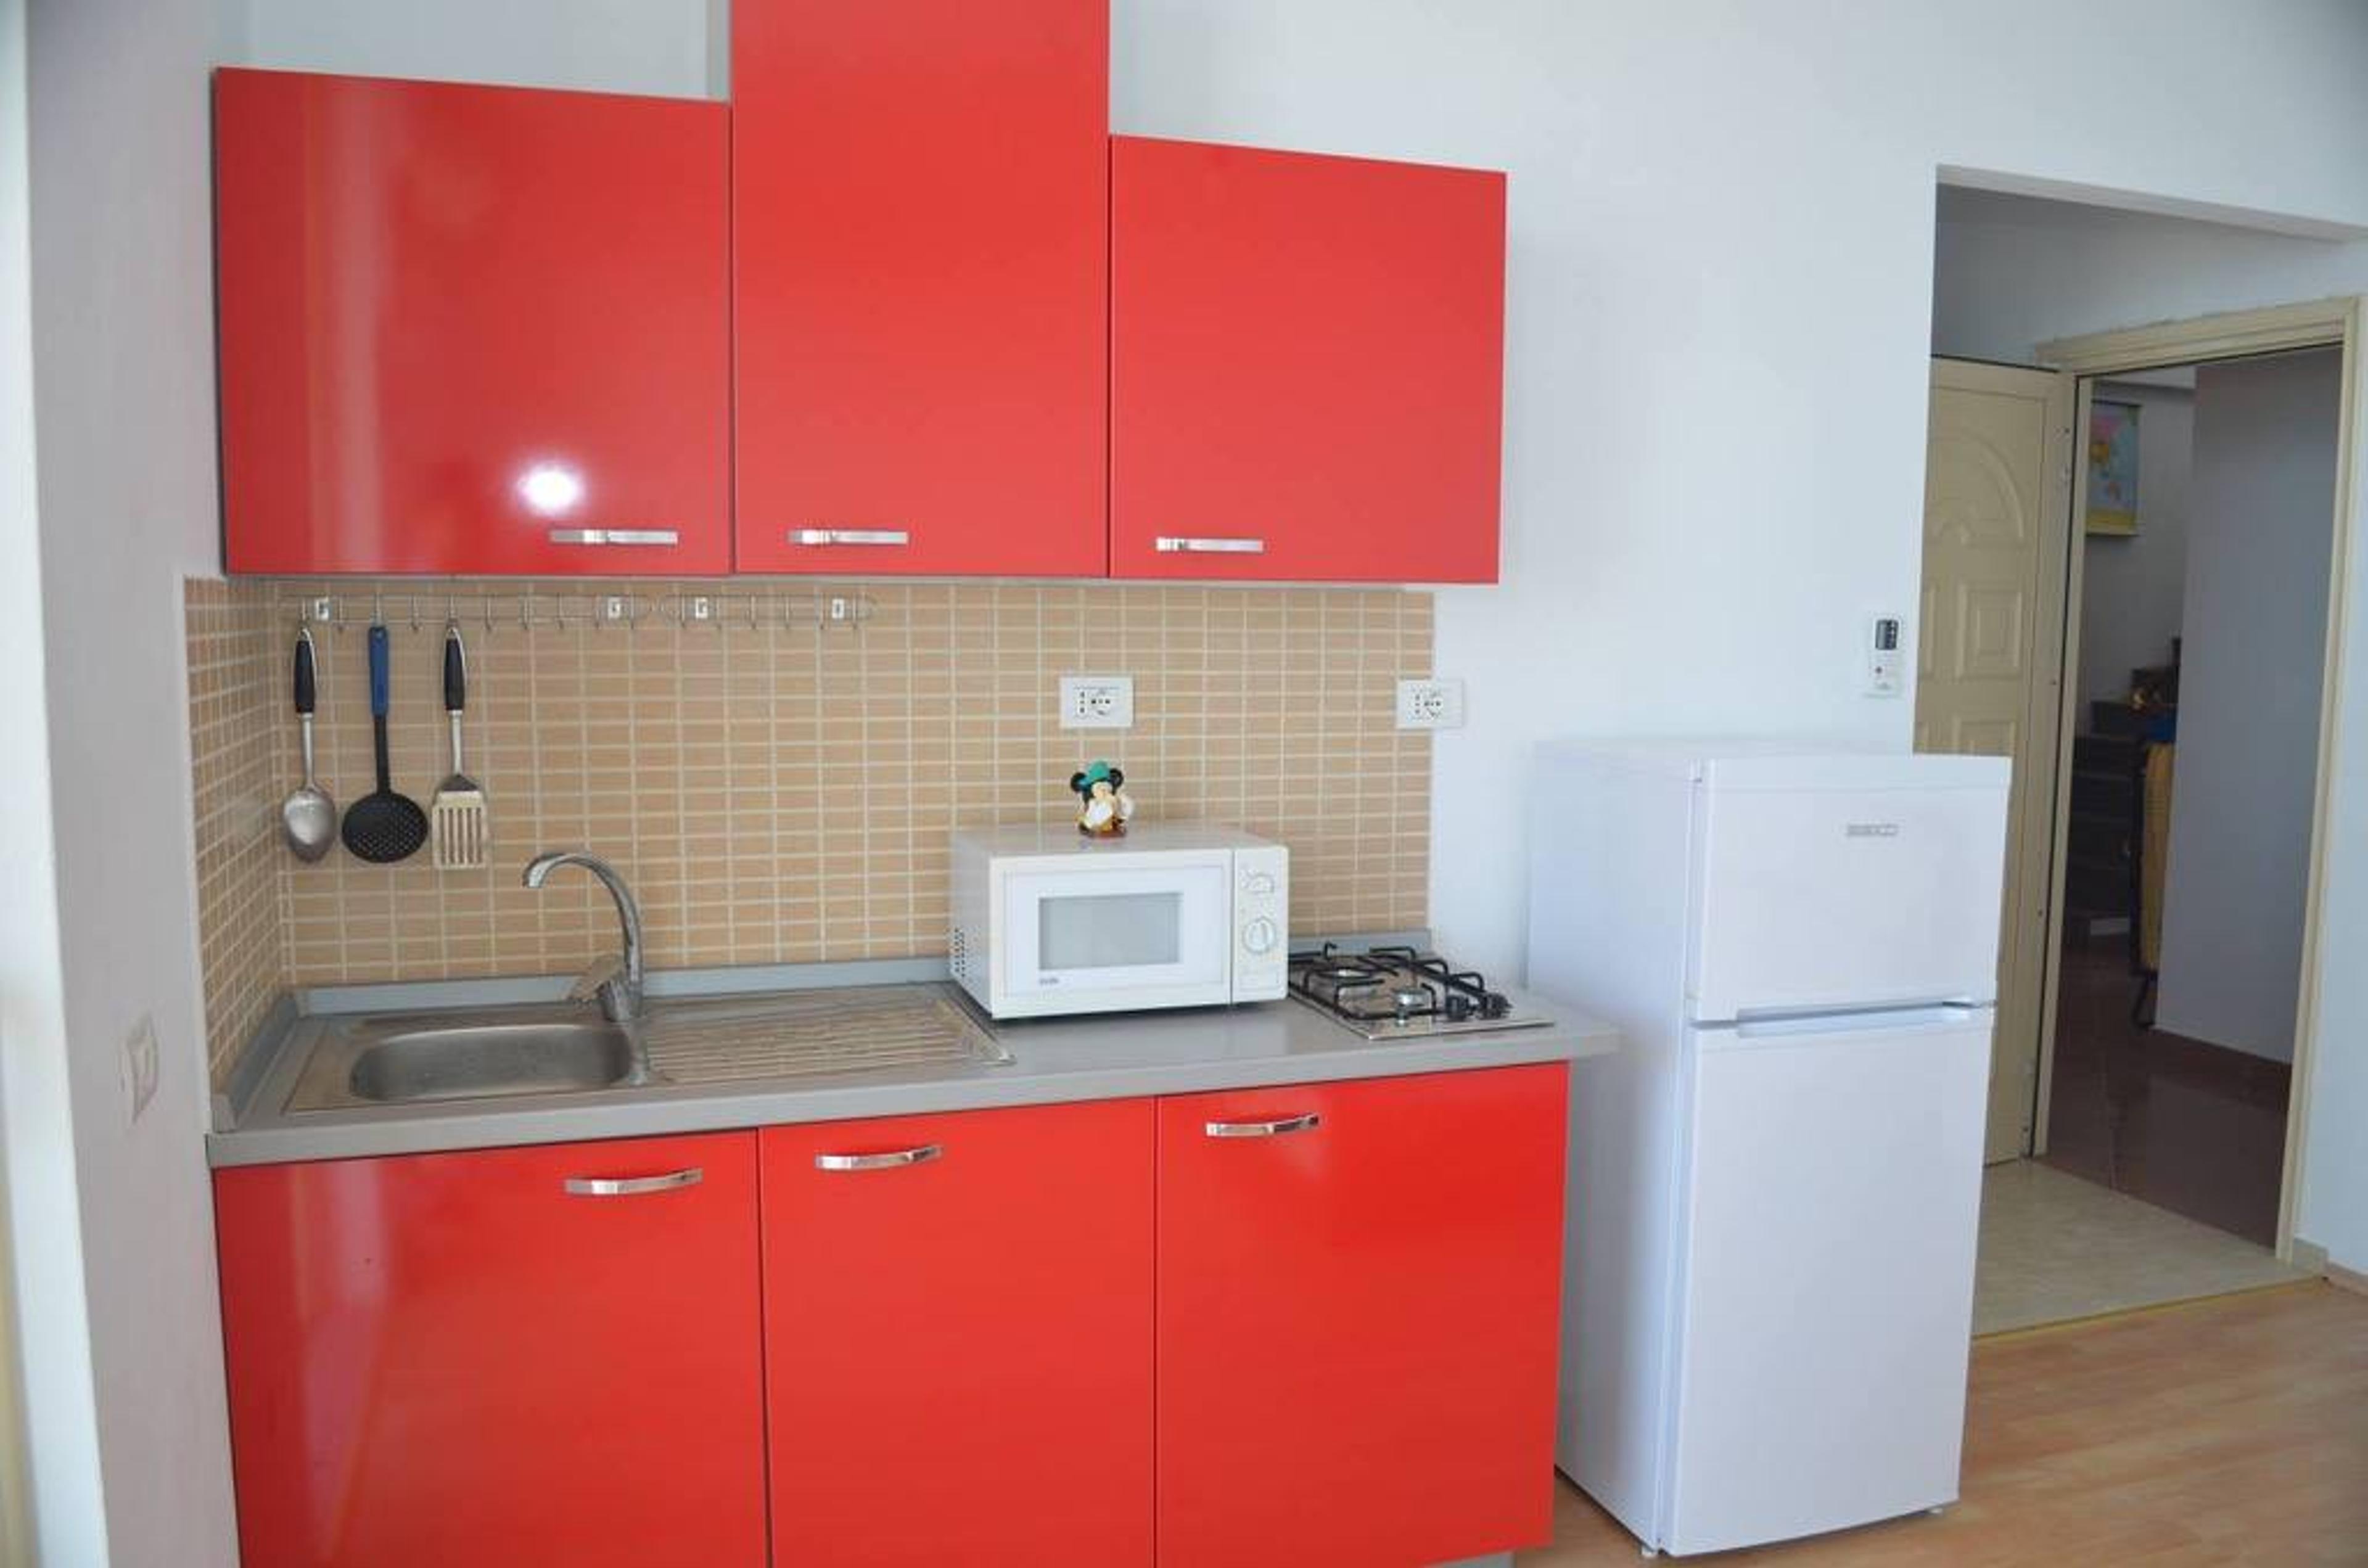 Red kitchen with fridge and microwave